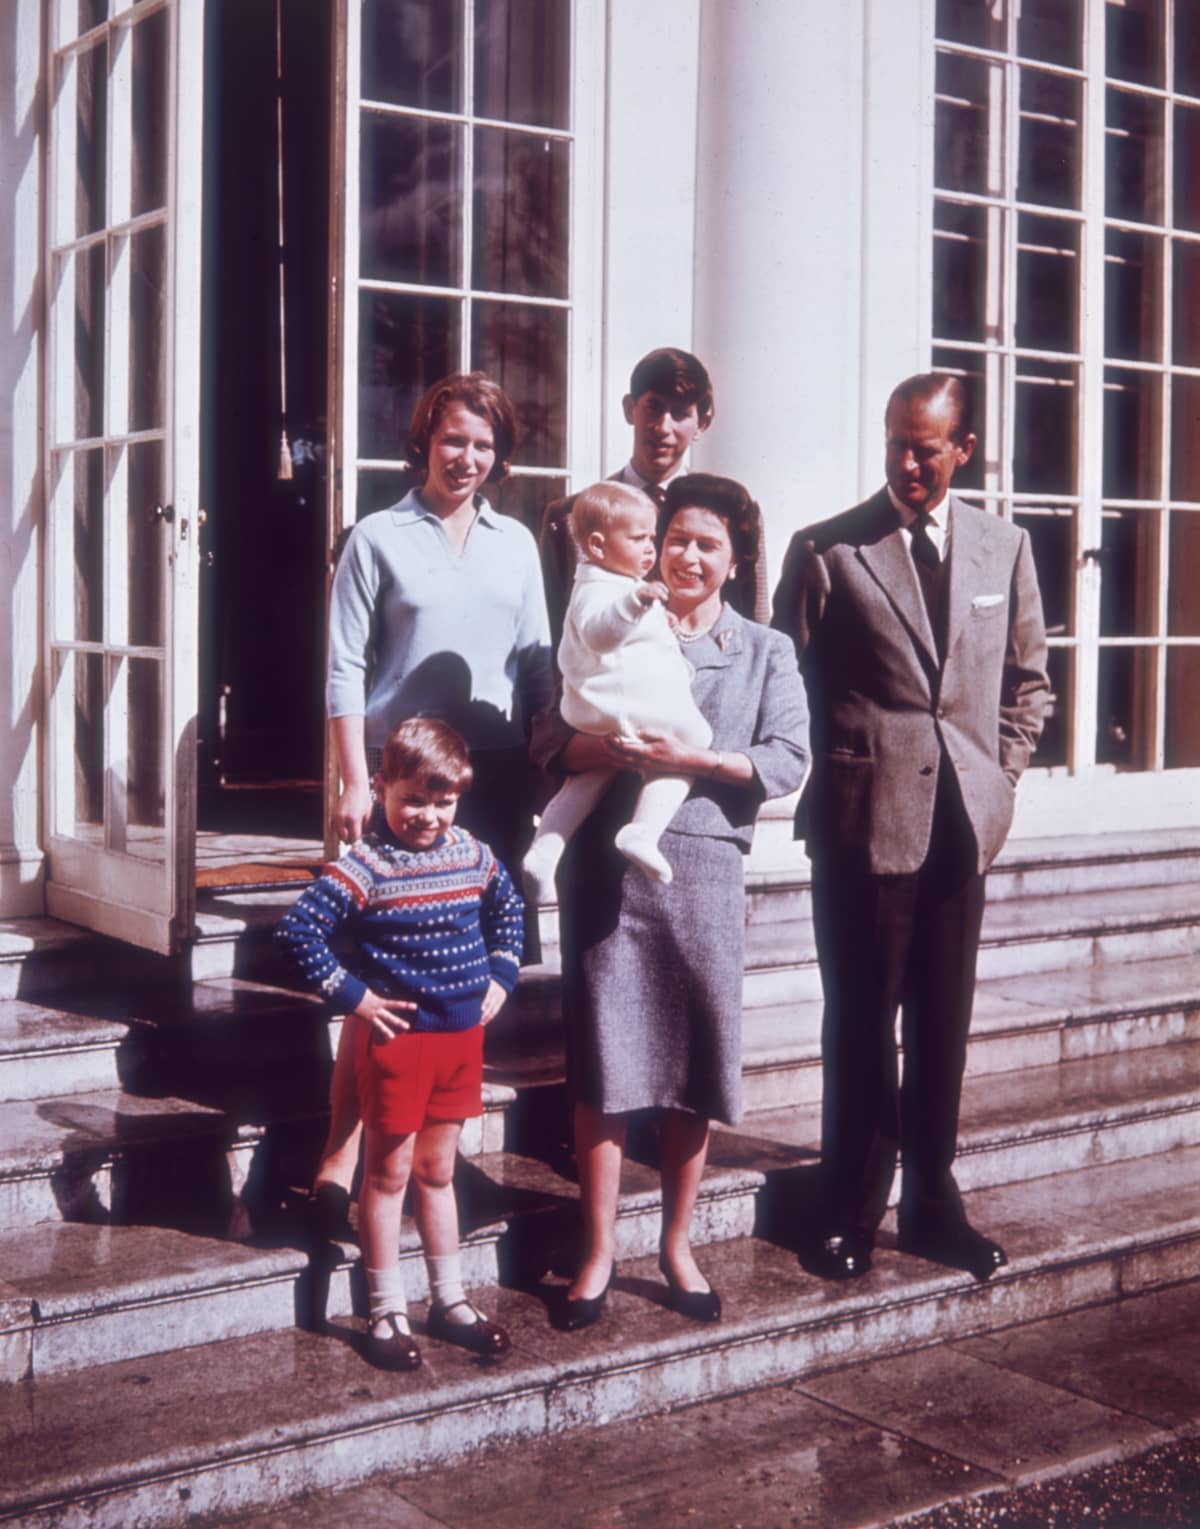 1965:  Queen Elizabeth II and Prince Philip at Windsor Castle with their children, Prince Charles, Princess Anne, Prince Andrew and little Prince Edward.  (Photo by Keystone/Getty Images)